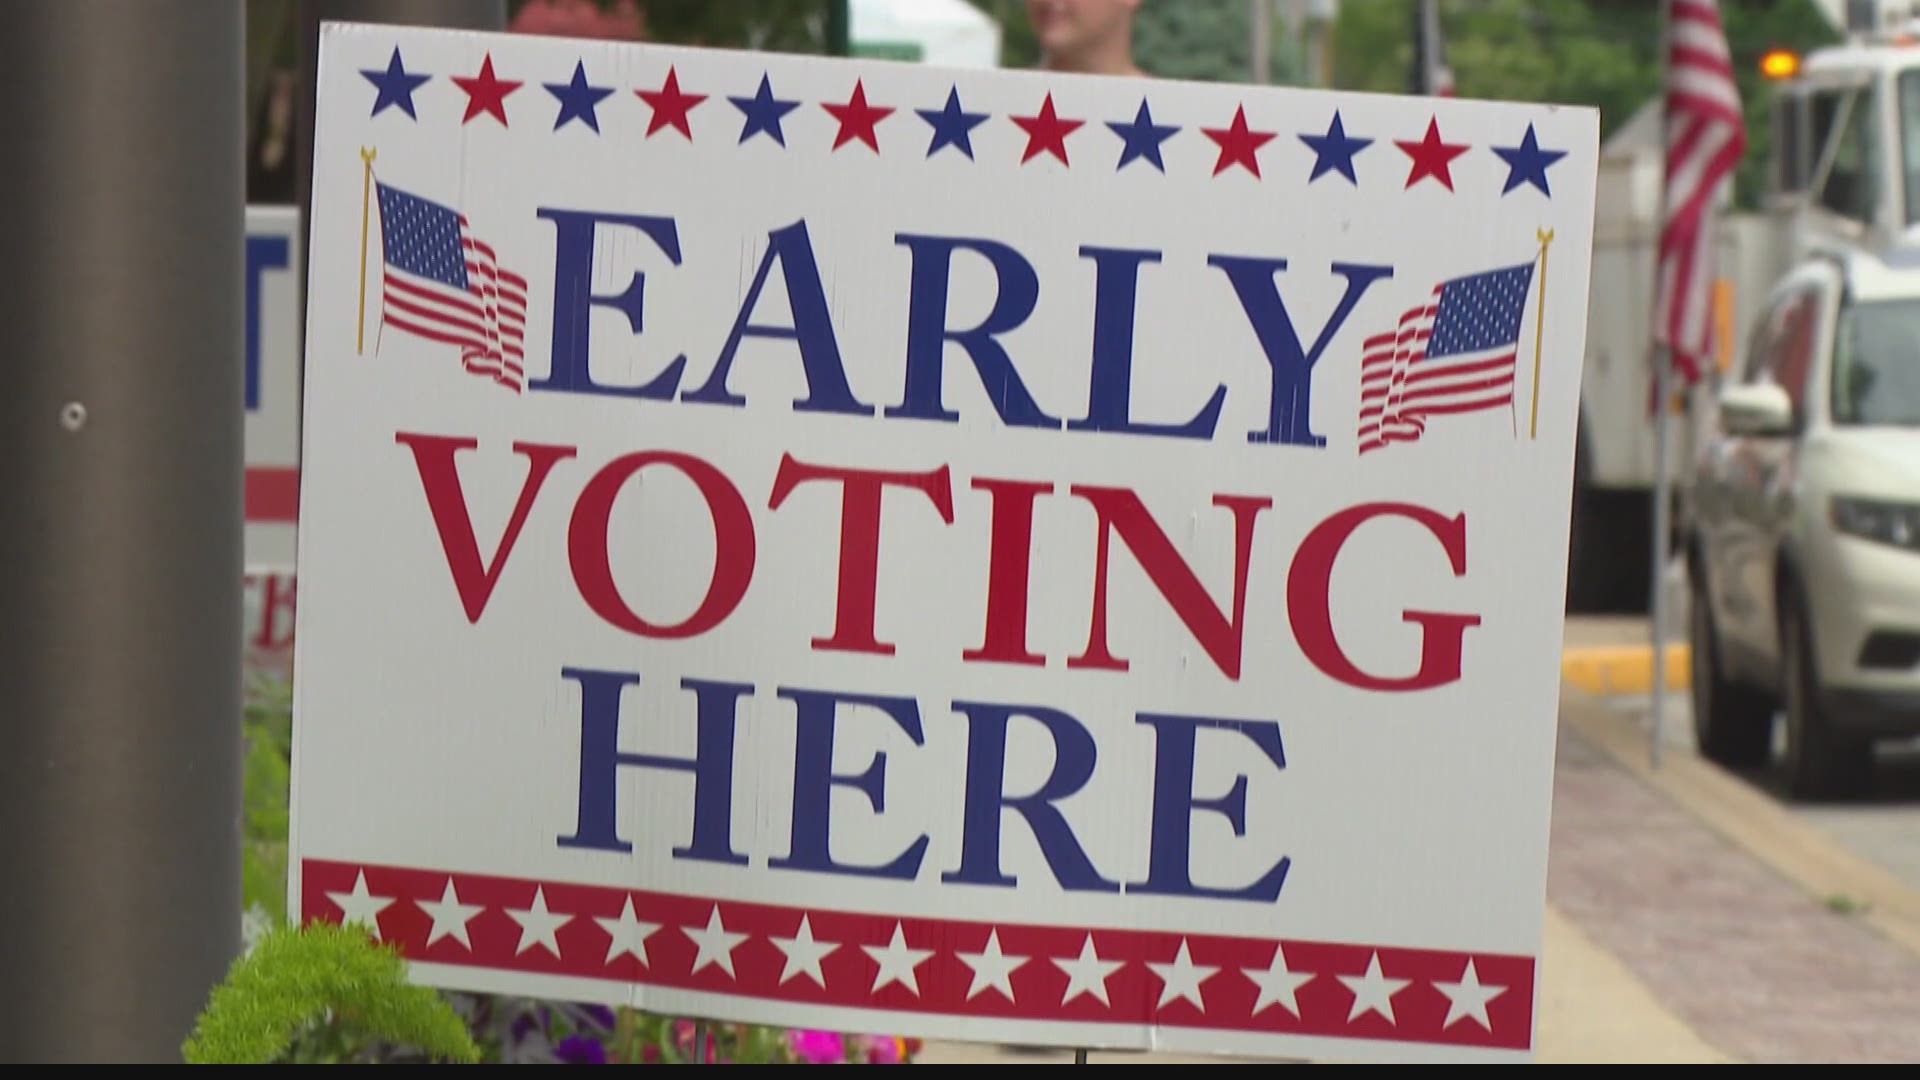 Early voting starts Tuesday in Indiana. Here's what you need to know before you vote.